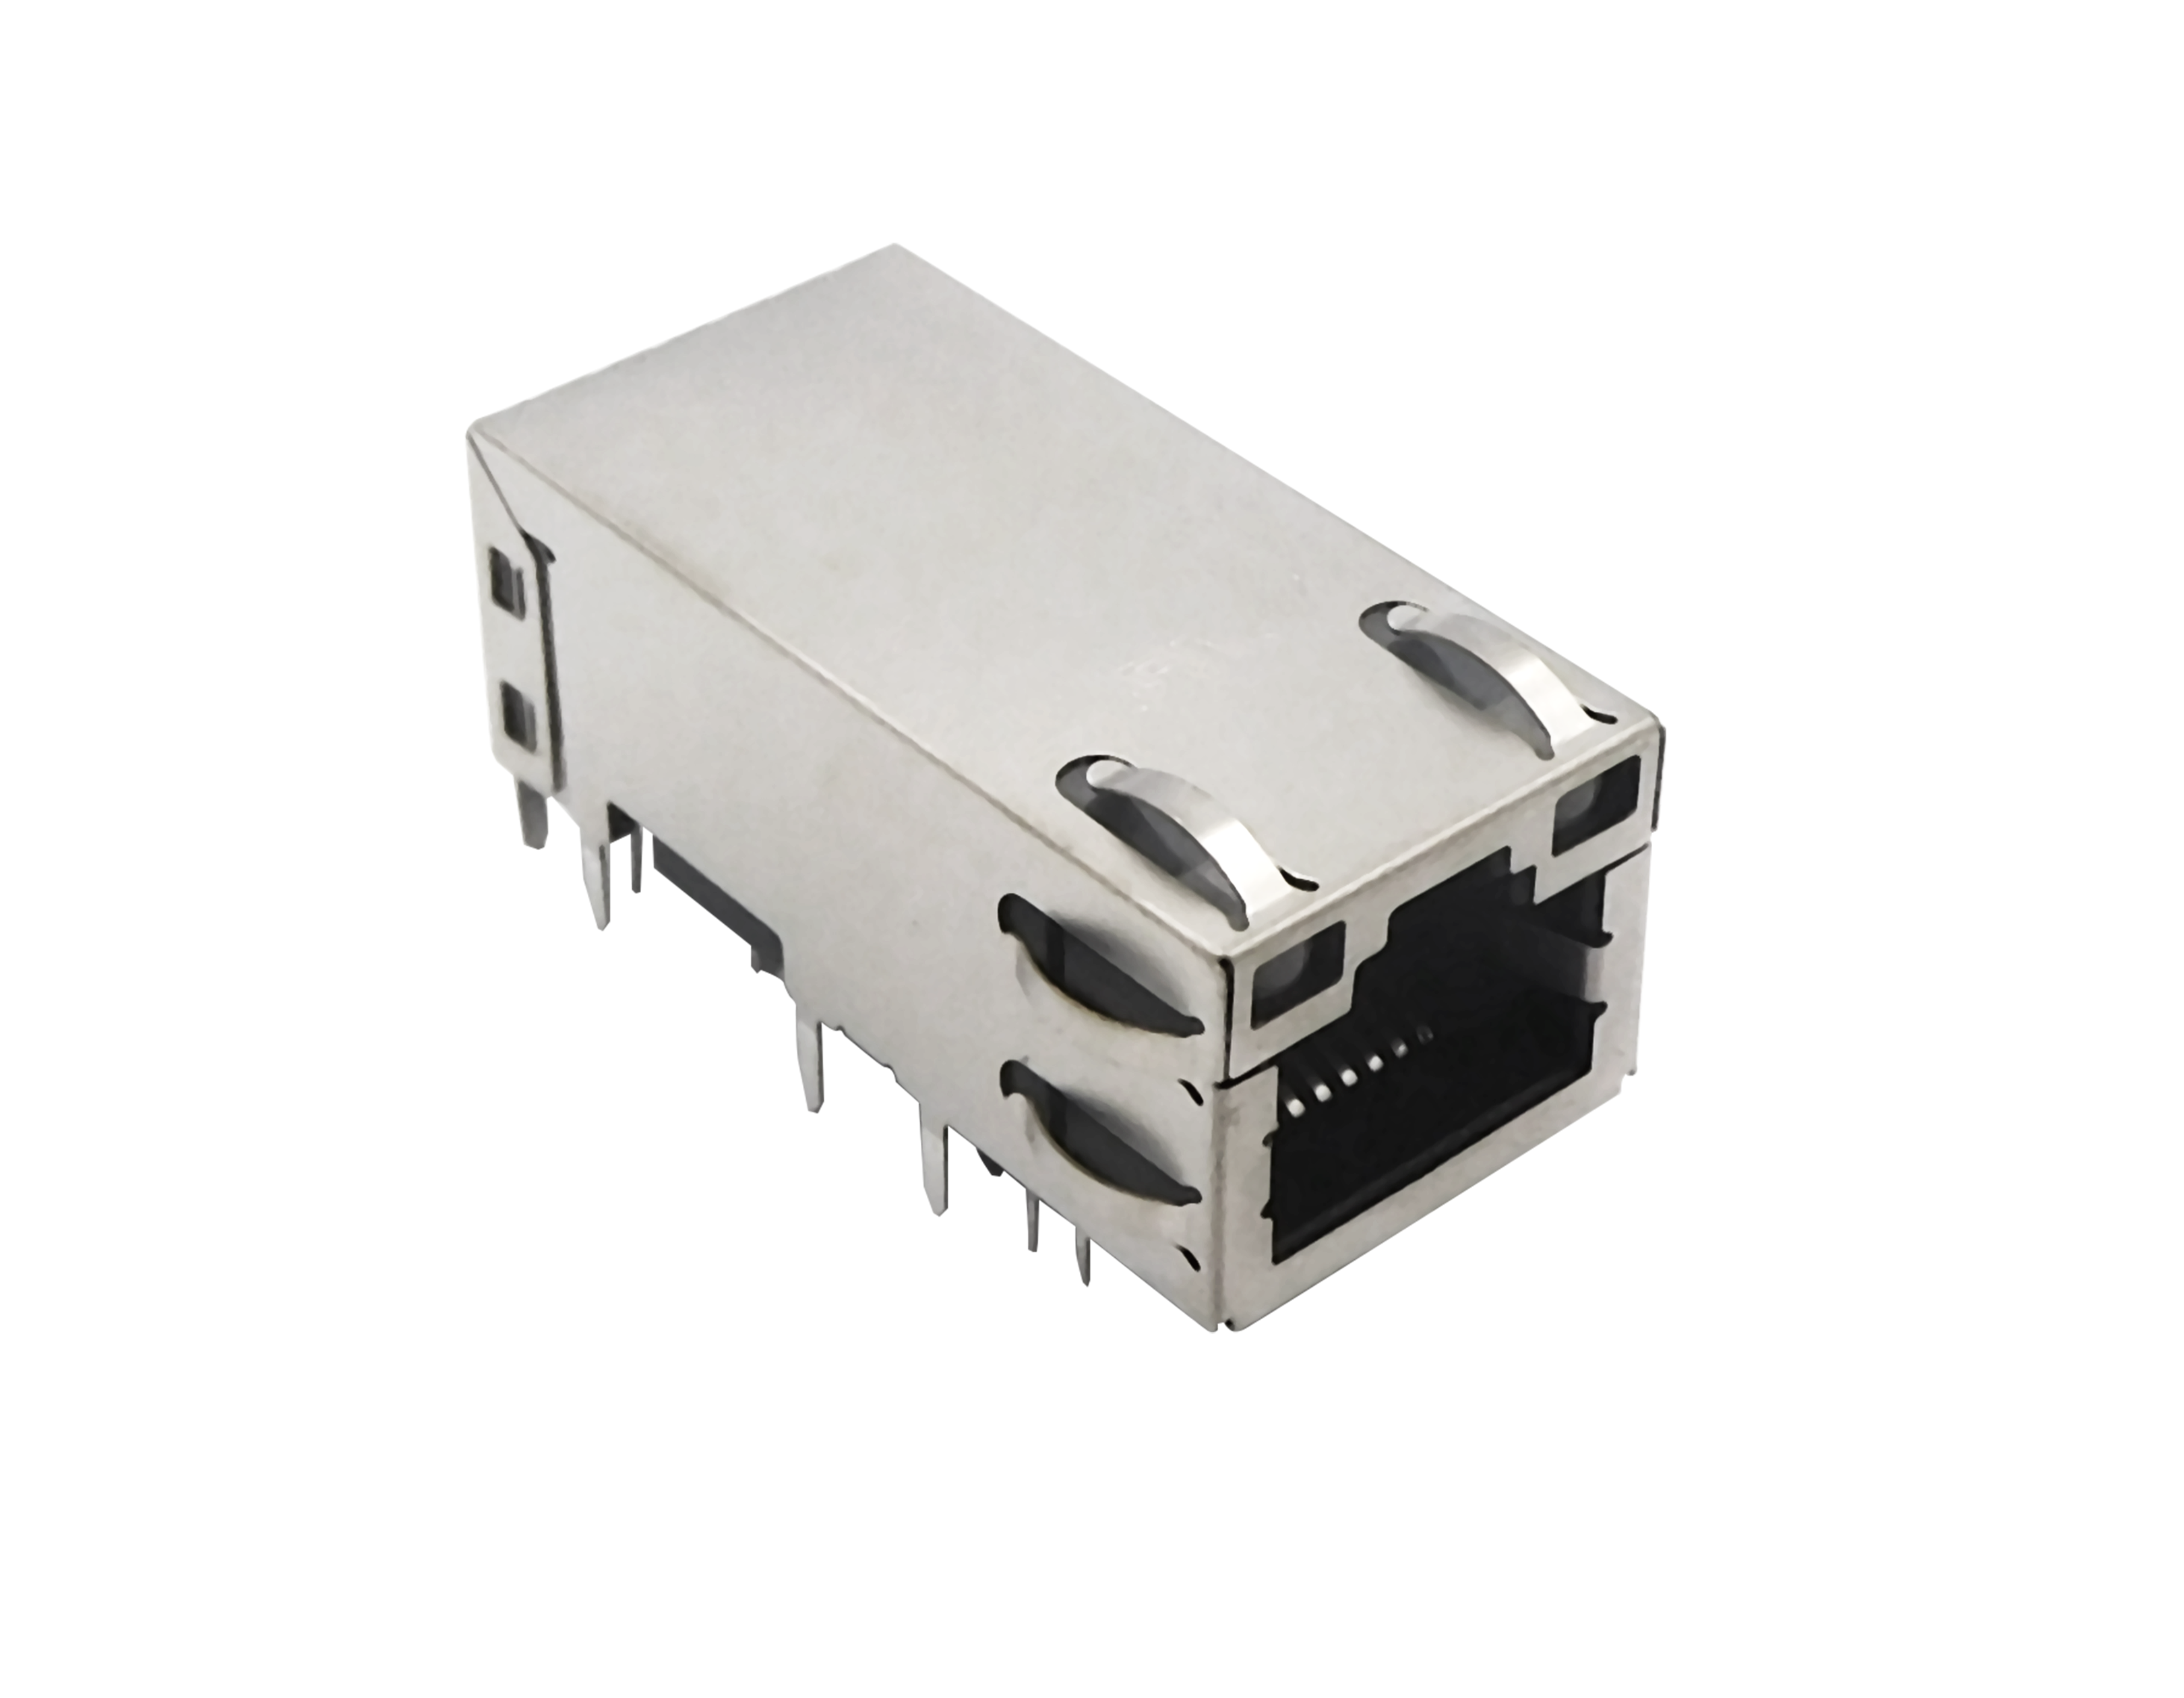 Bel Magnetic Solutions Introduces Single--Port 60W PoE ICMs